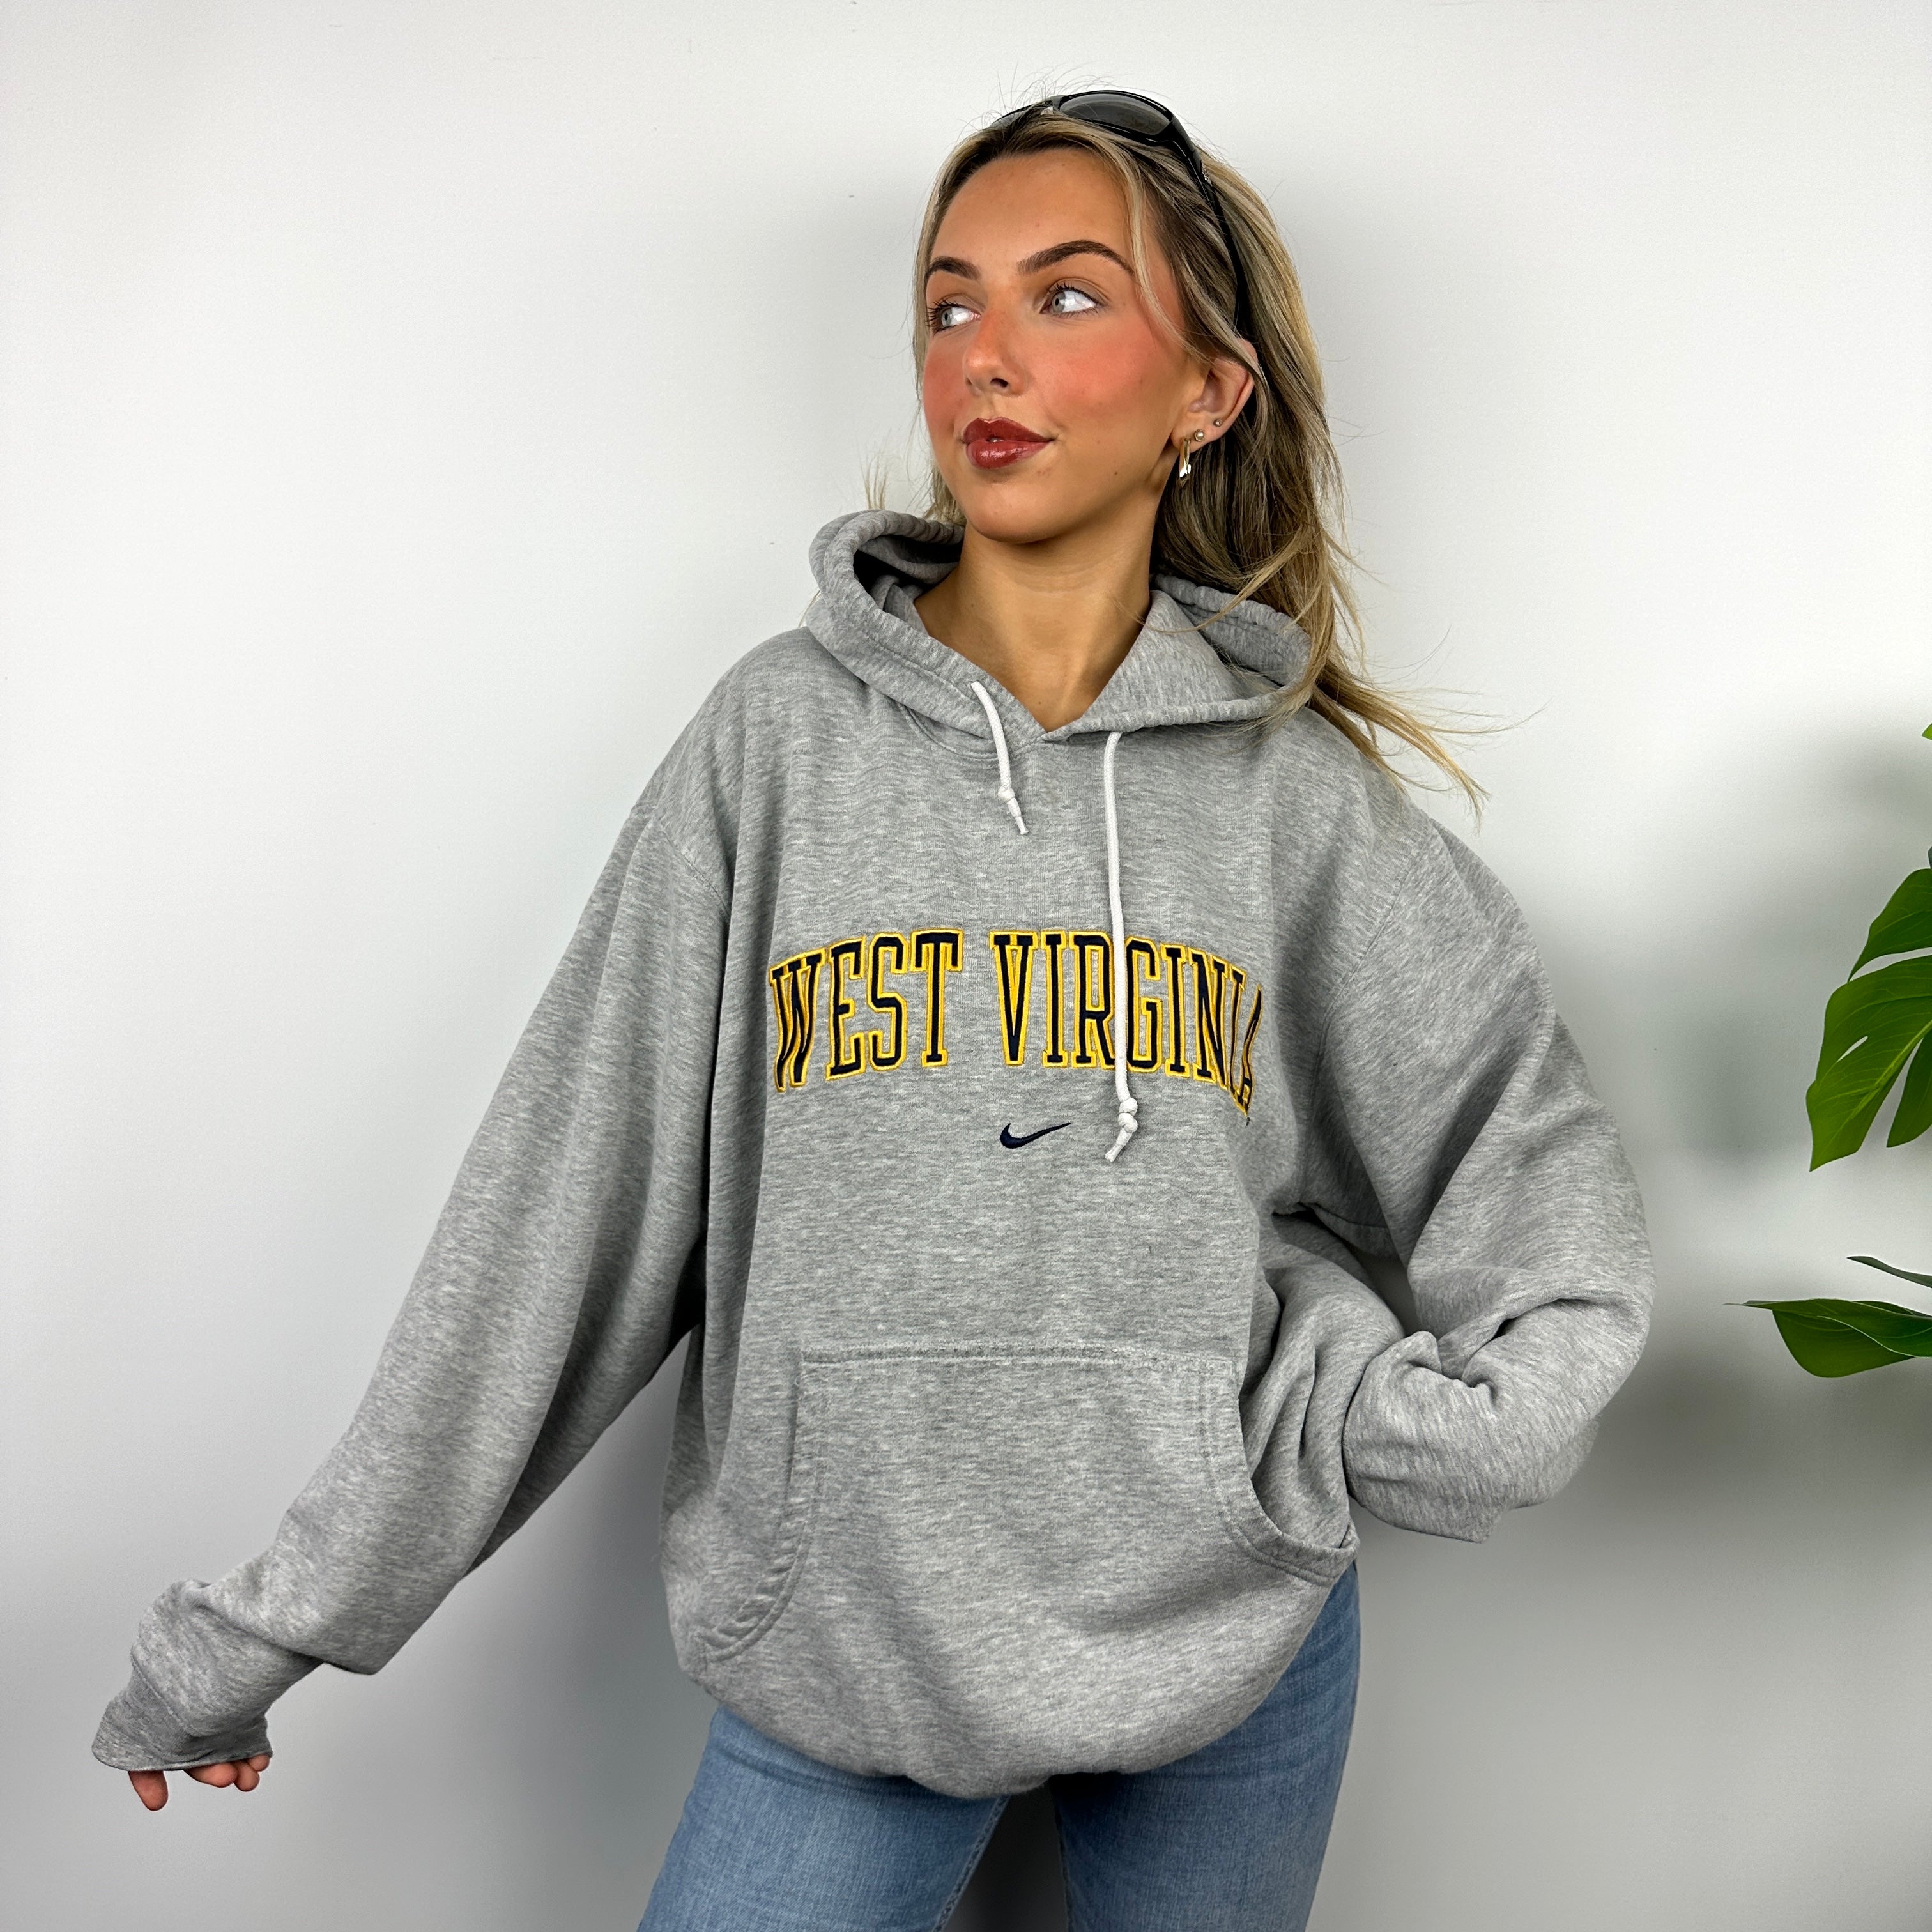 Nike x West Virginia Grey Embroidered Spell Out Hoodie (L)